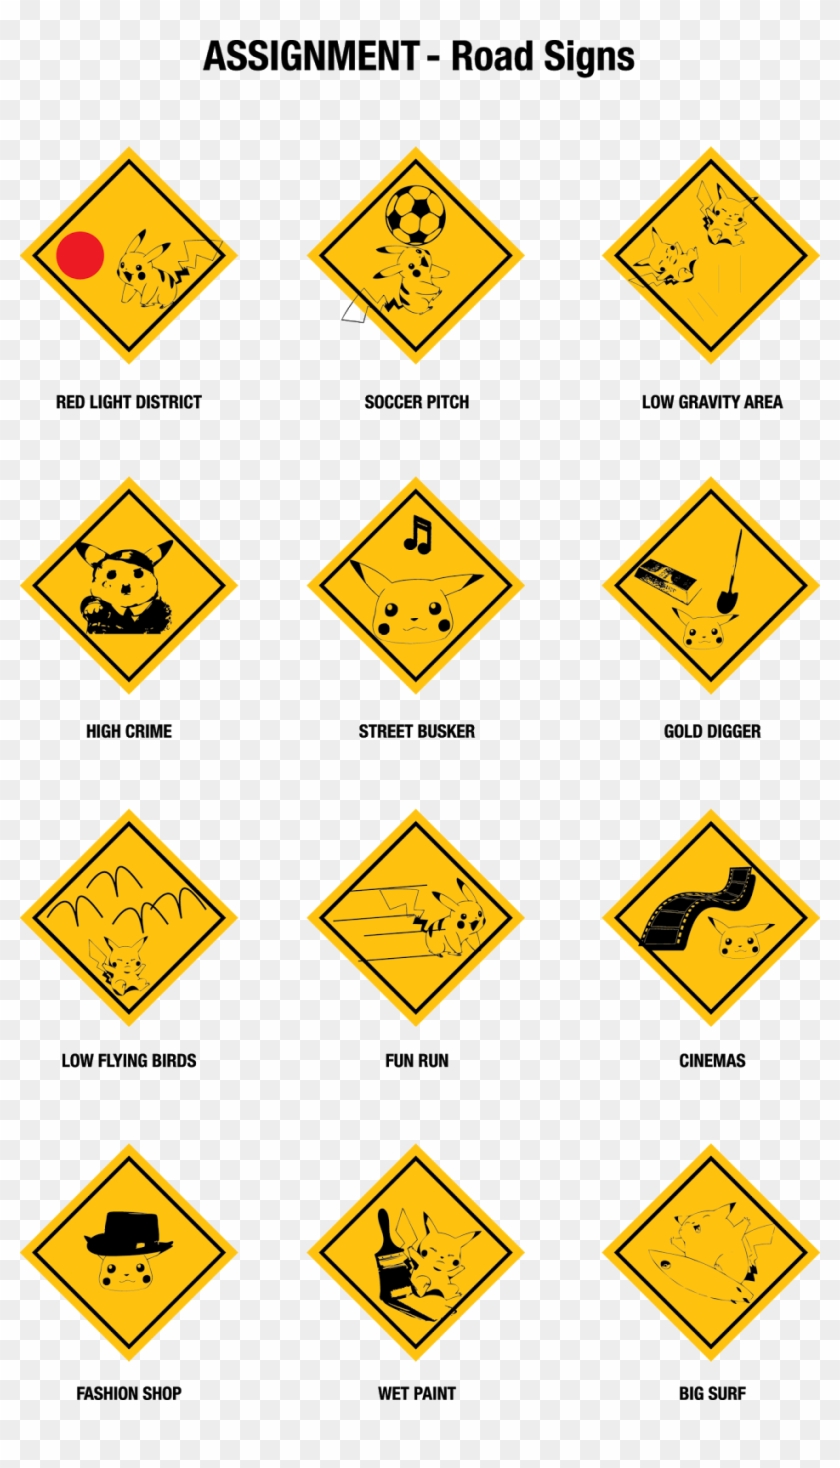 Signs For Our Little Yellow Pokemon Friend - Pokemon Road Sign Clipart #3097422